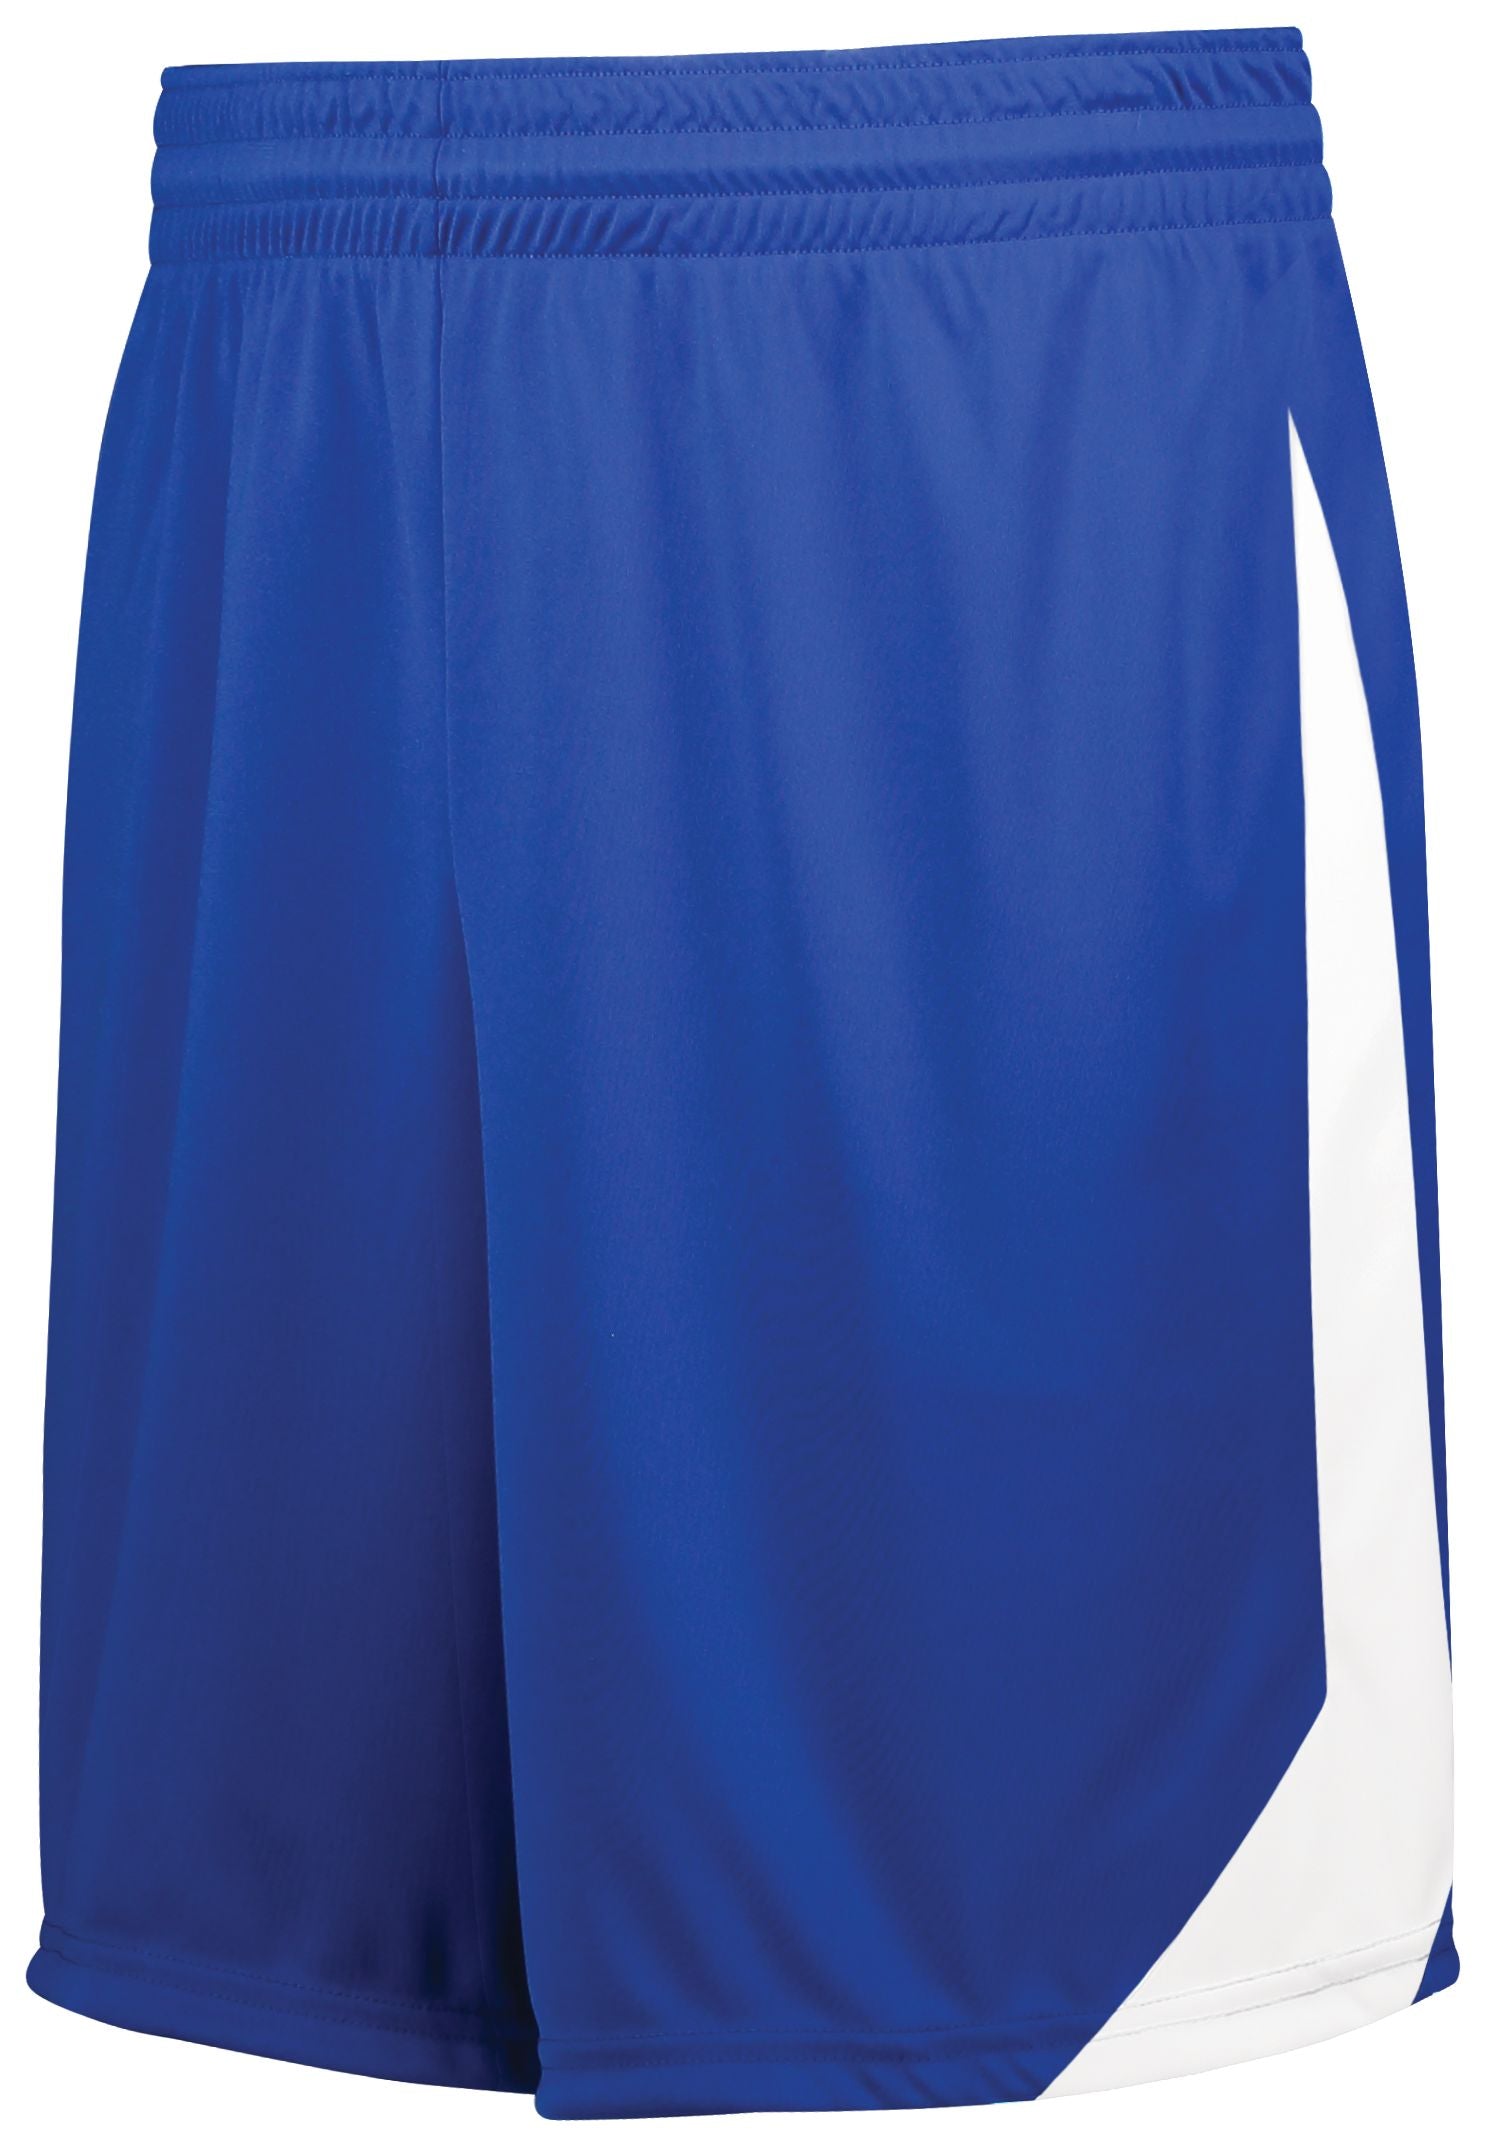 High 5 Athletico Shorts in Royal/White  -Part of the Adult, Adult-Shorts, High5-Products, Soccer, All-Sports-1 product lines at KanaleyCreations.com